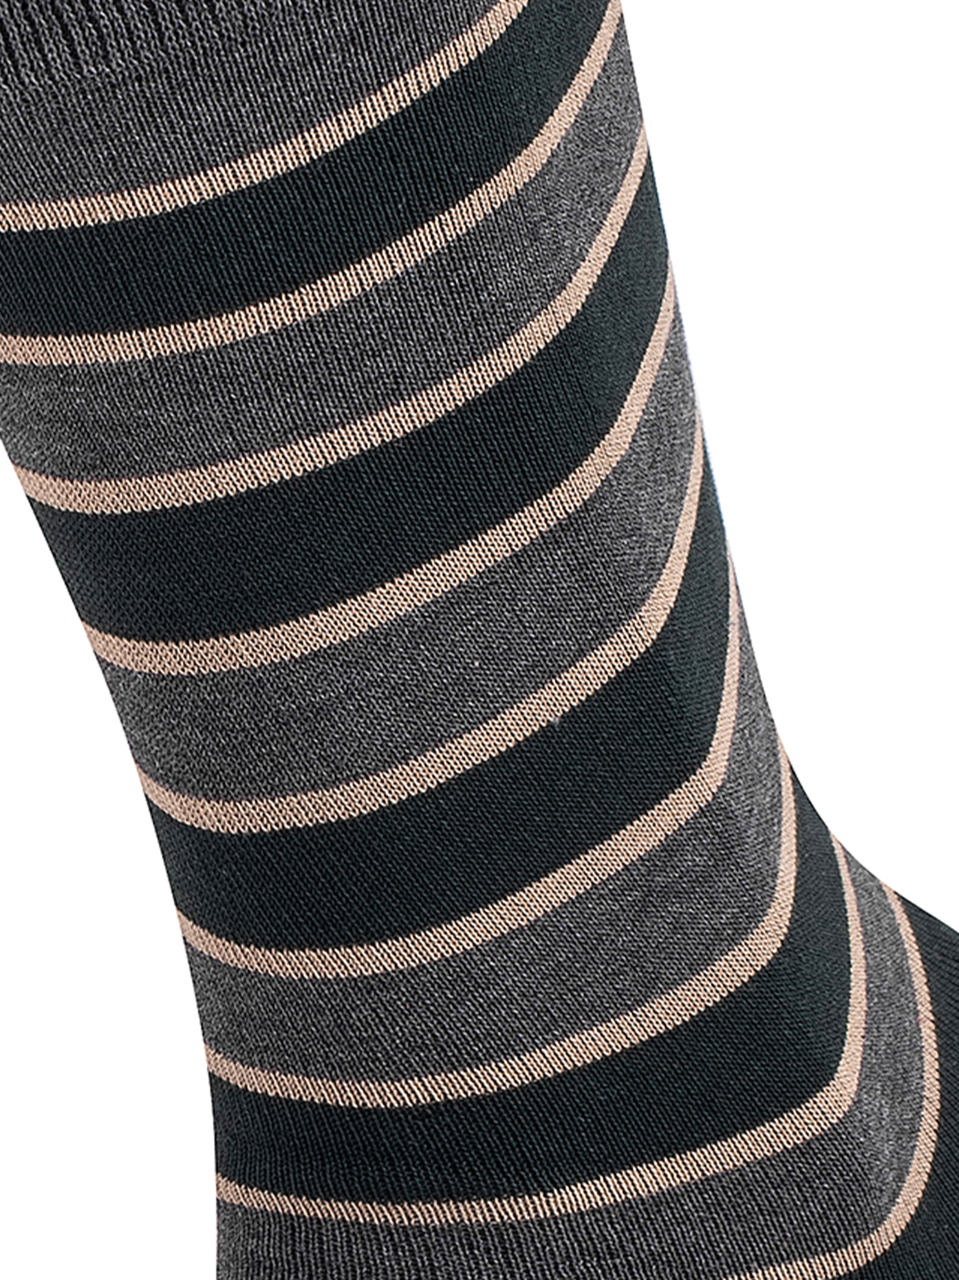 Picture of STRIPES GREY/DARK GREEN